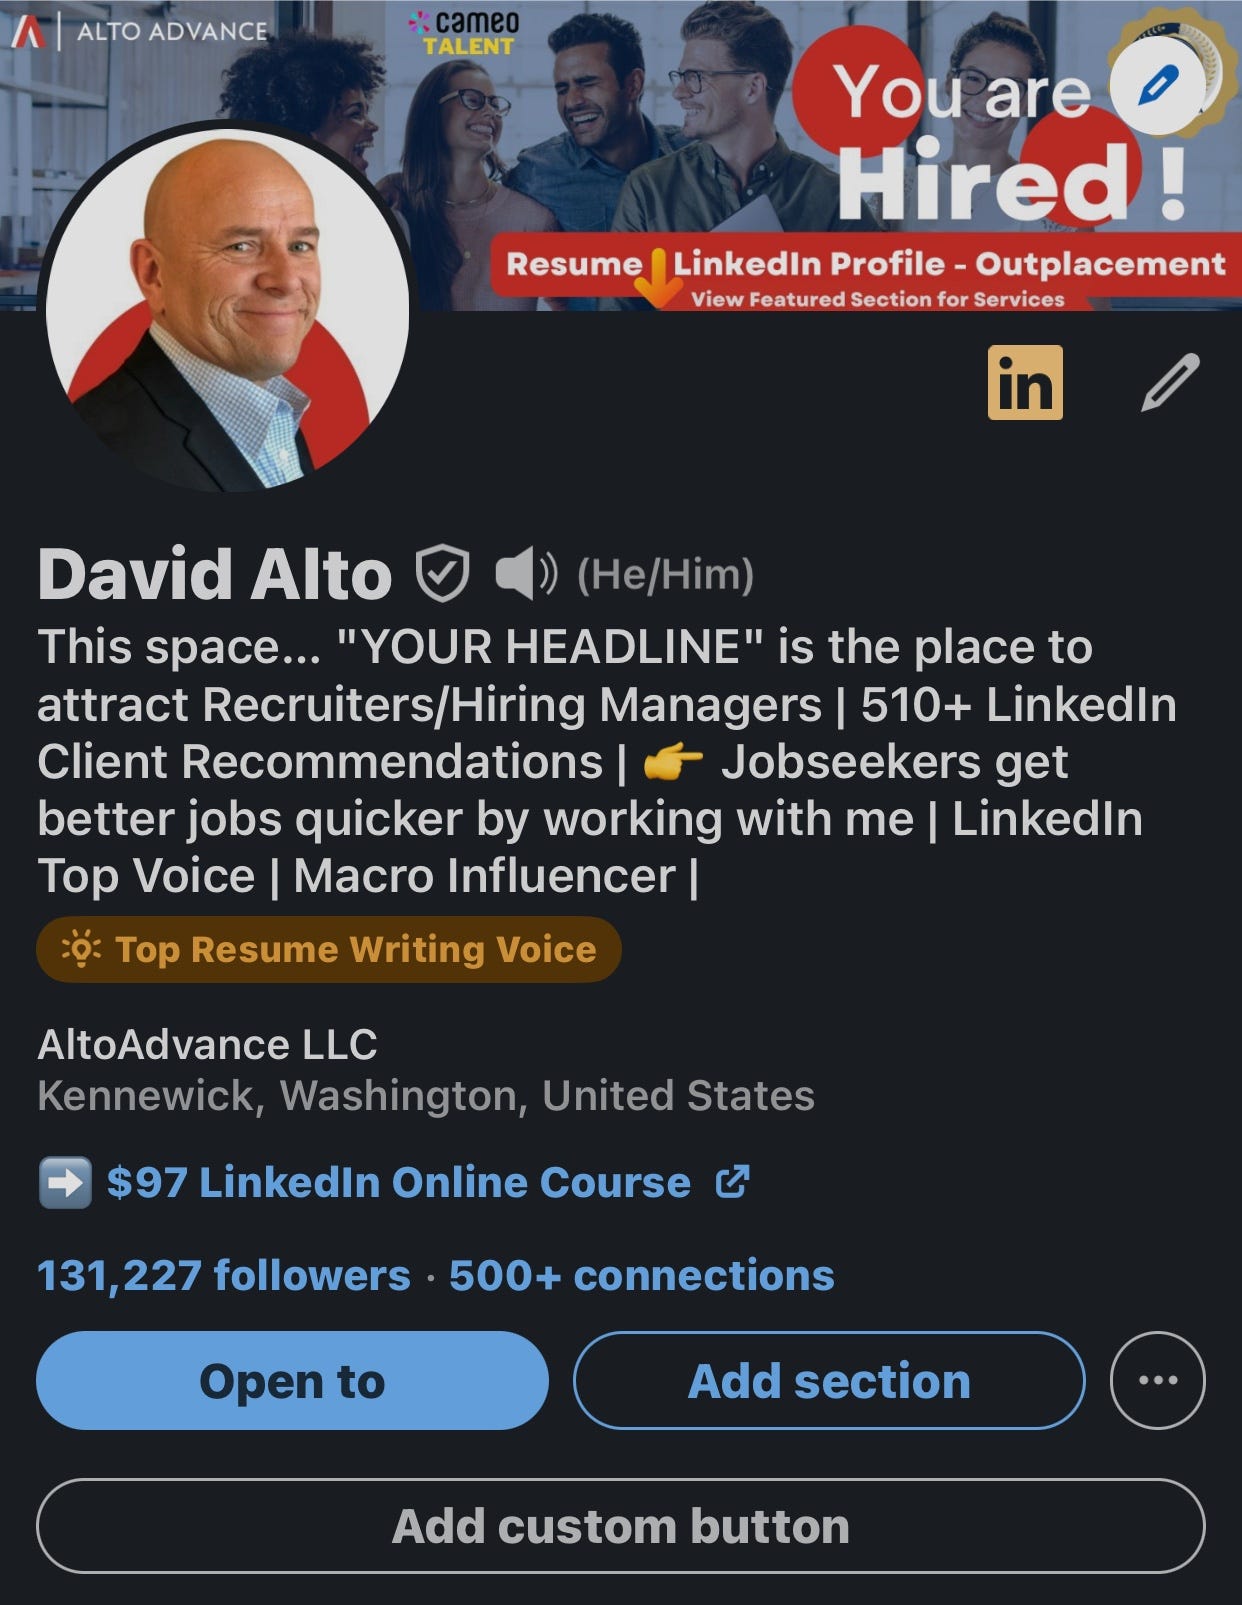 How I Earned the Honor of Top Voice on LinkedIn